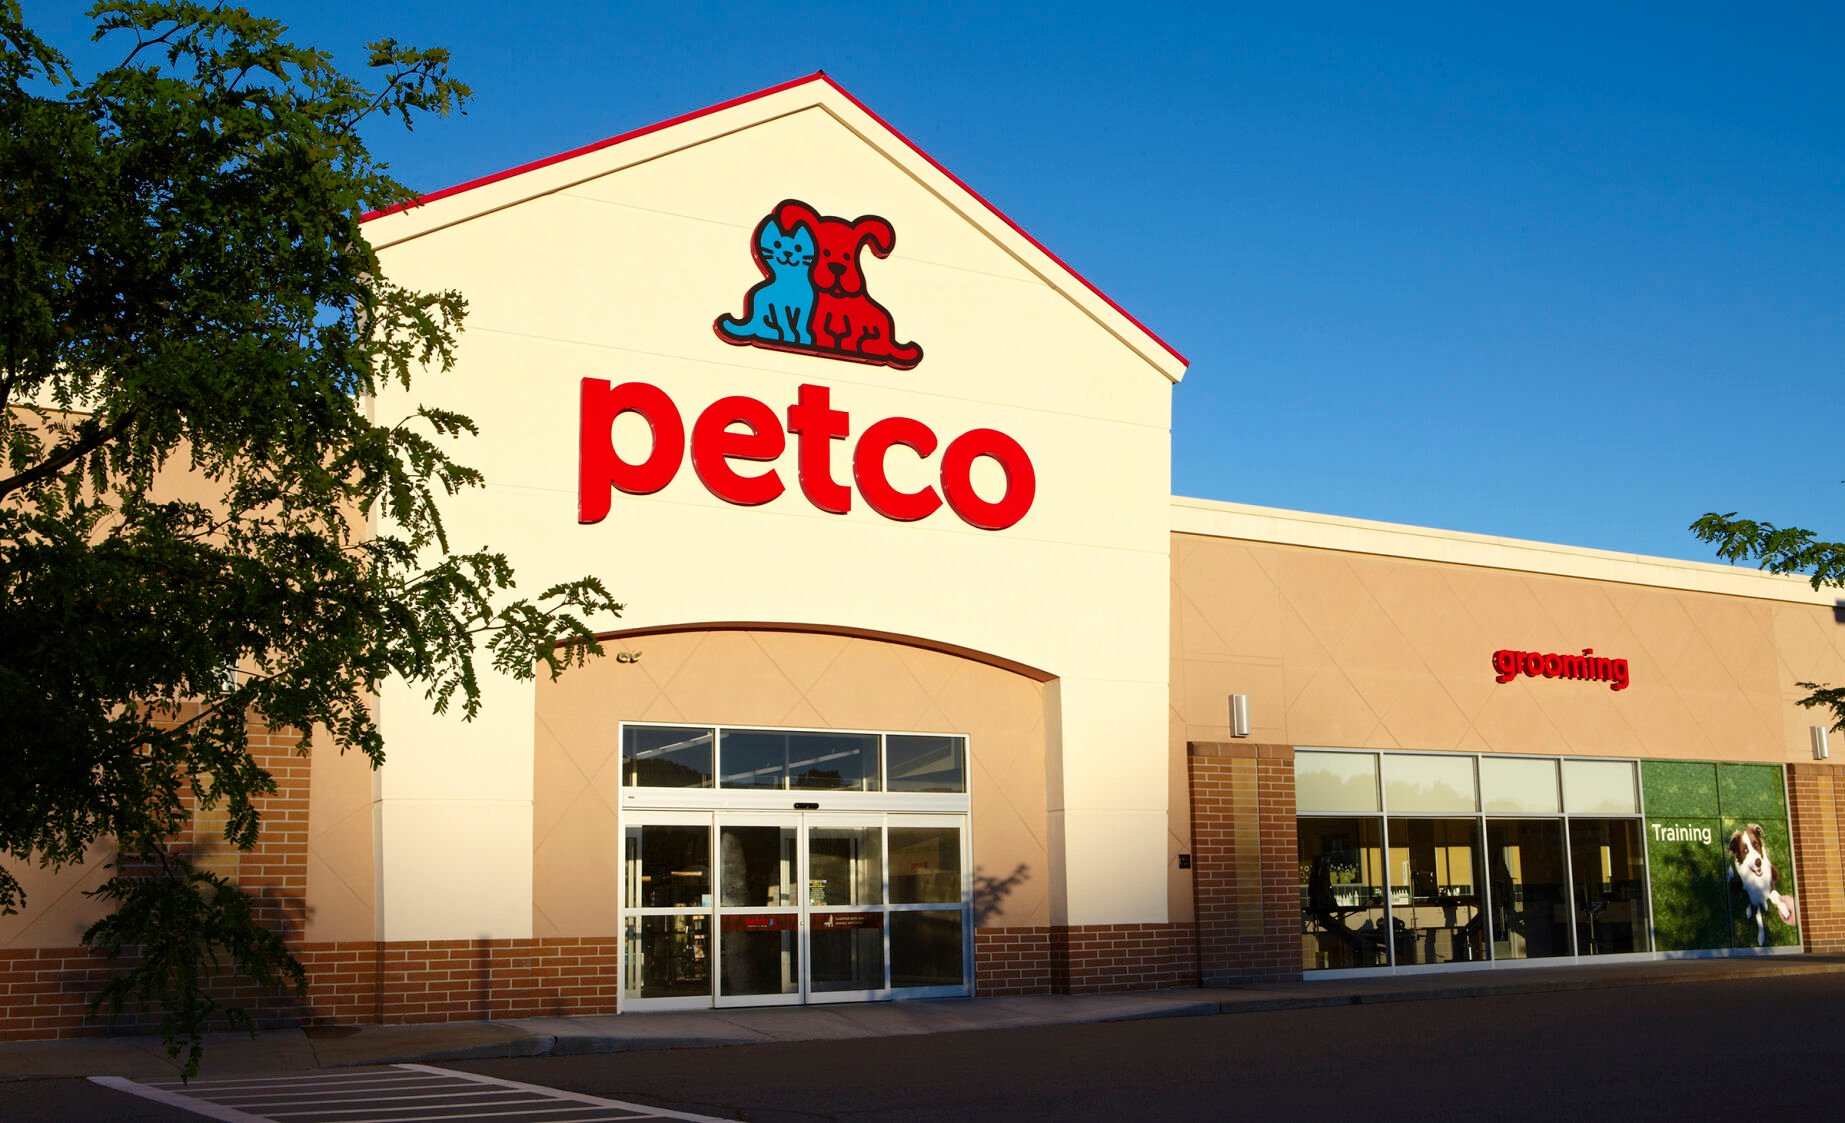 thrive affordable vet care petco